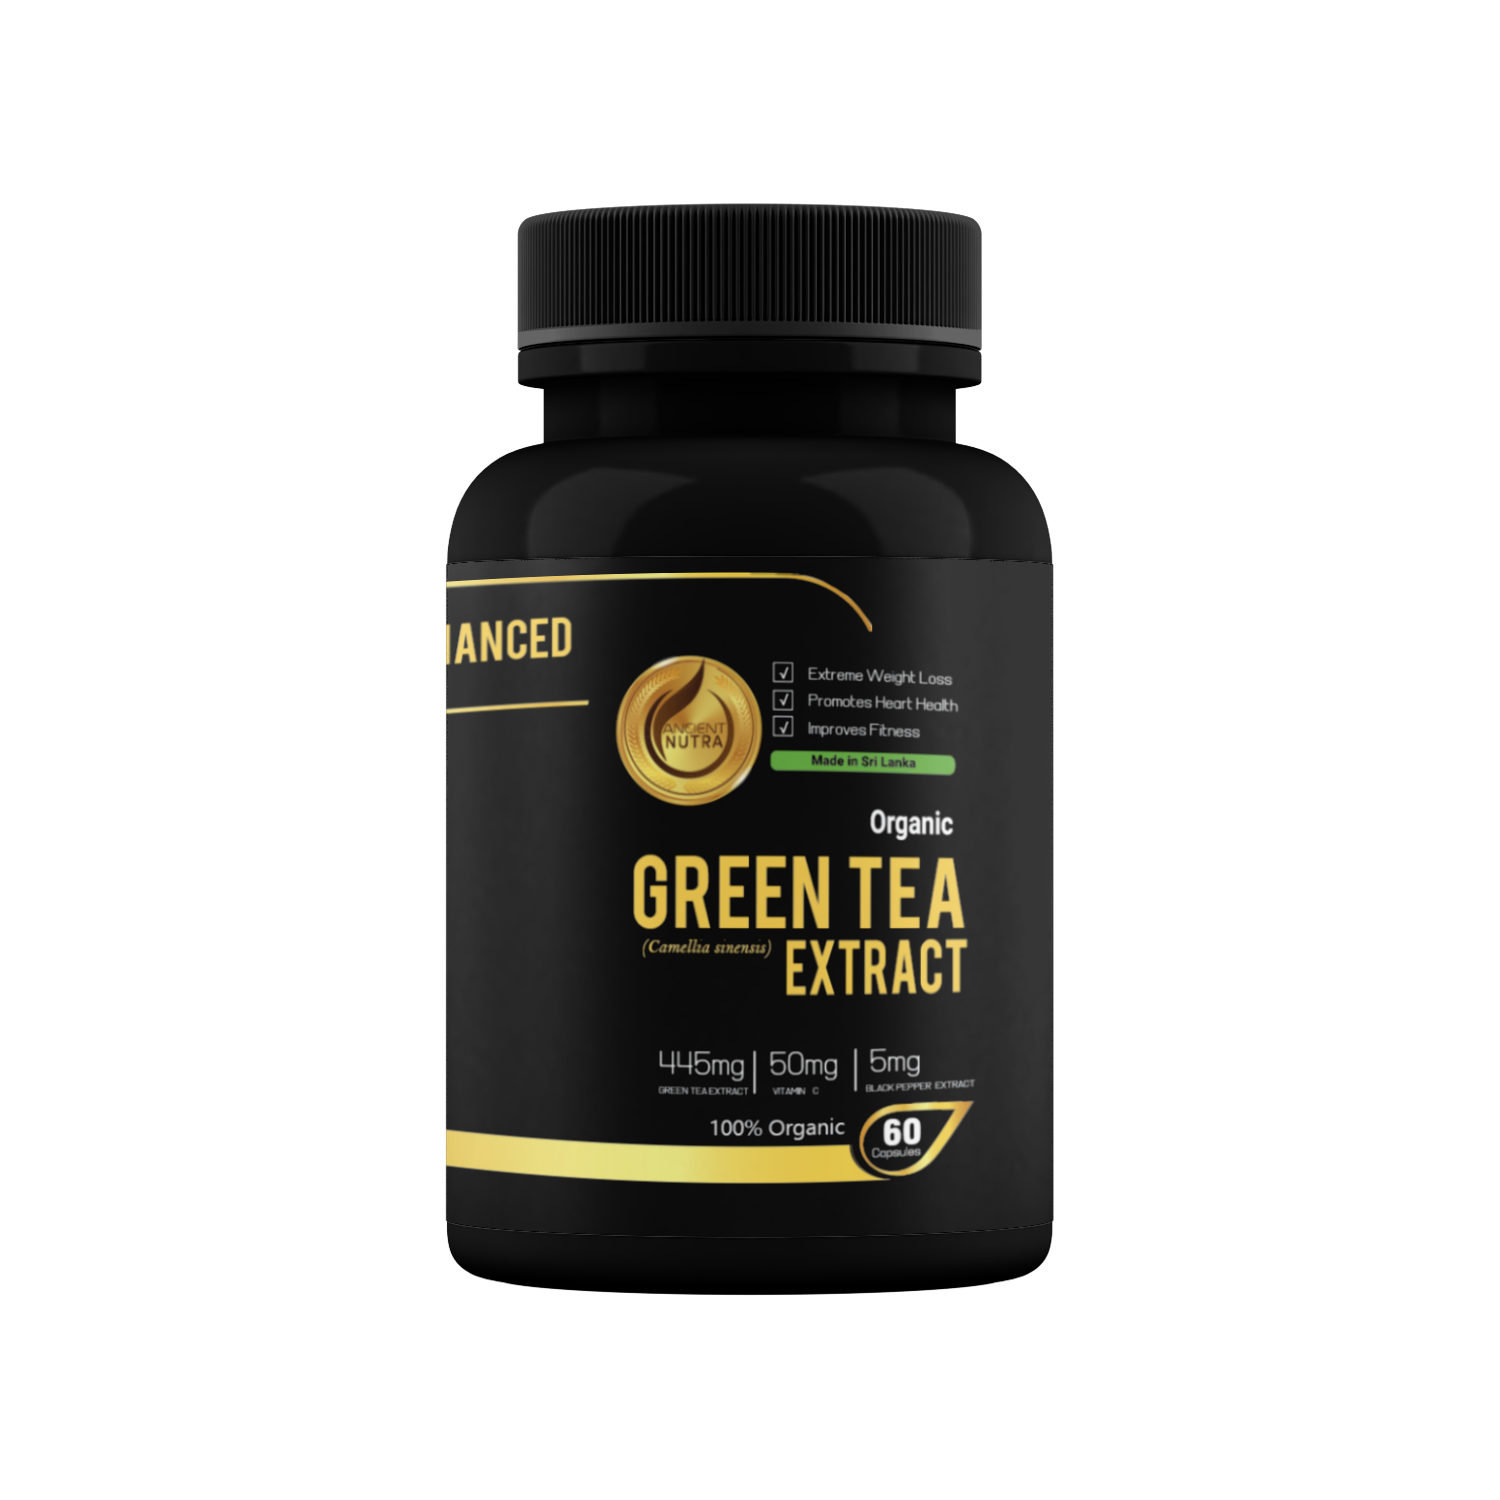 3 Green Tea Extracts & Get Free Multi Function Puller